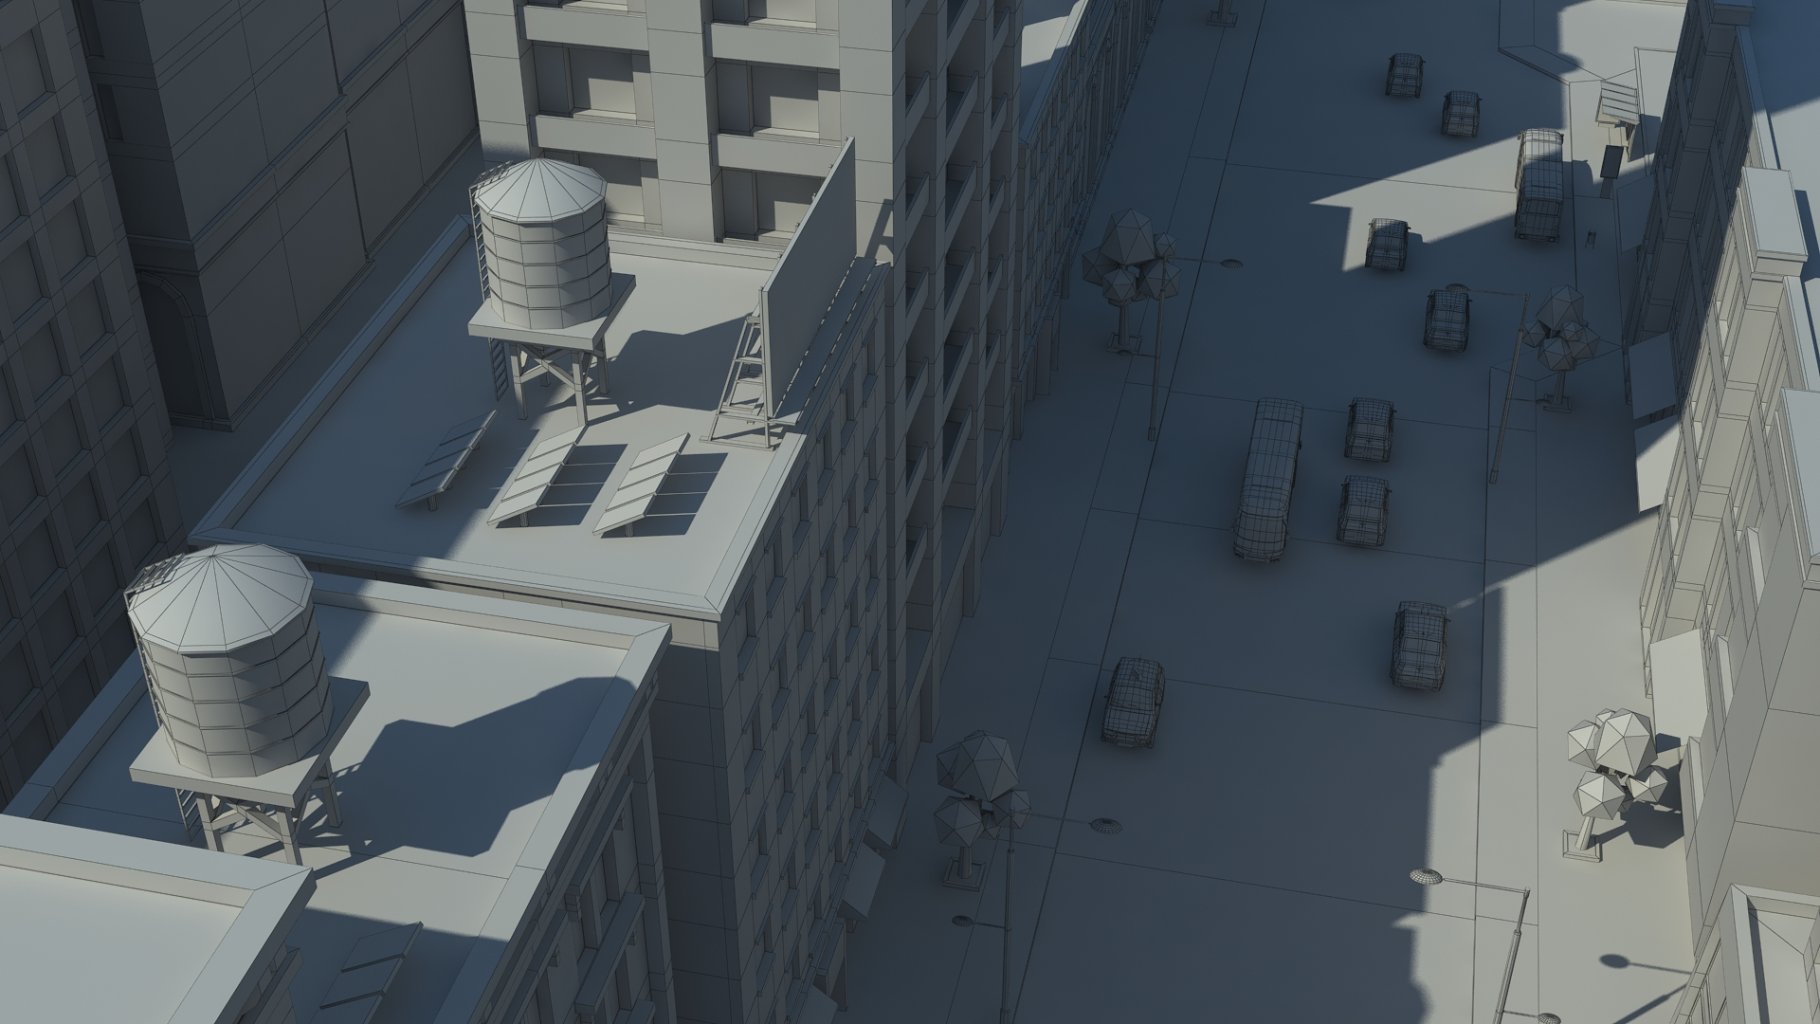 Rendering an elegant lowpoly 3d city model without textures